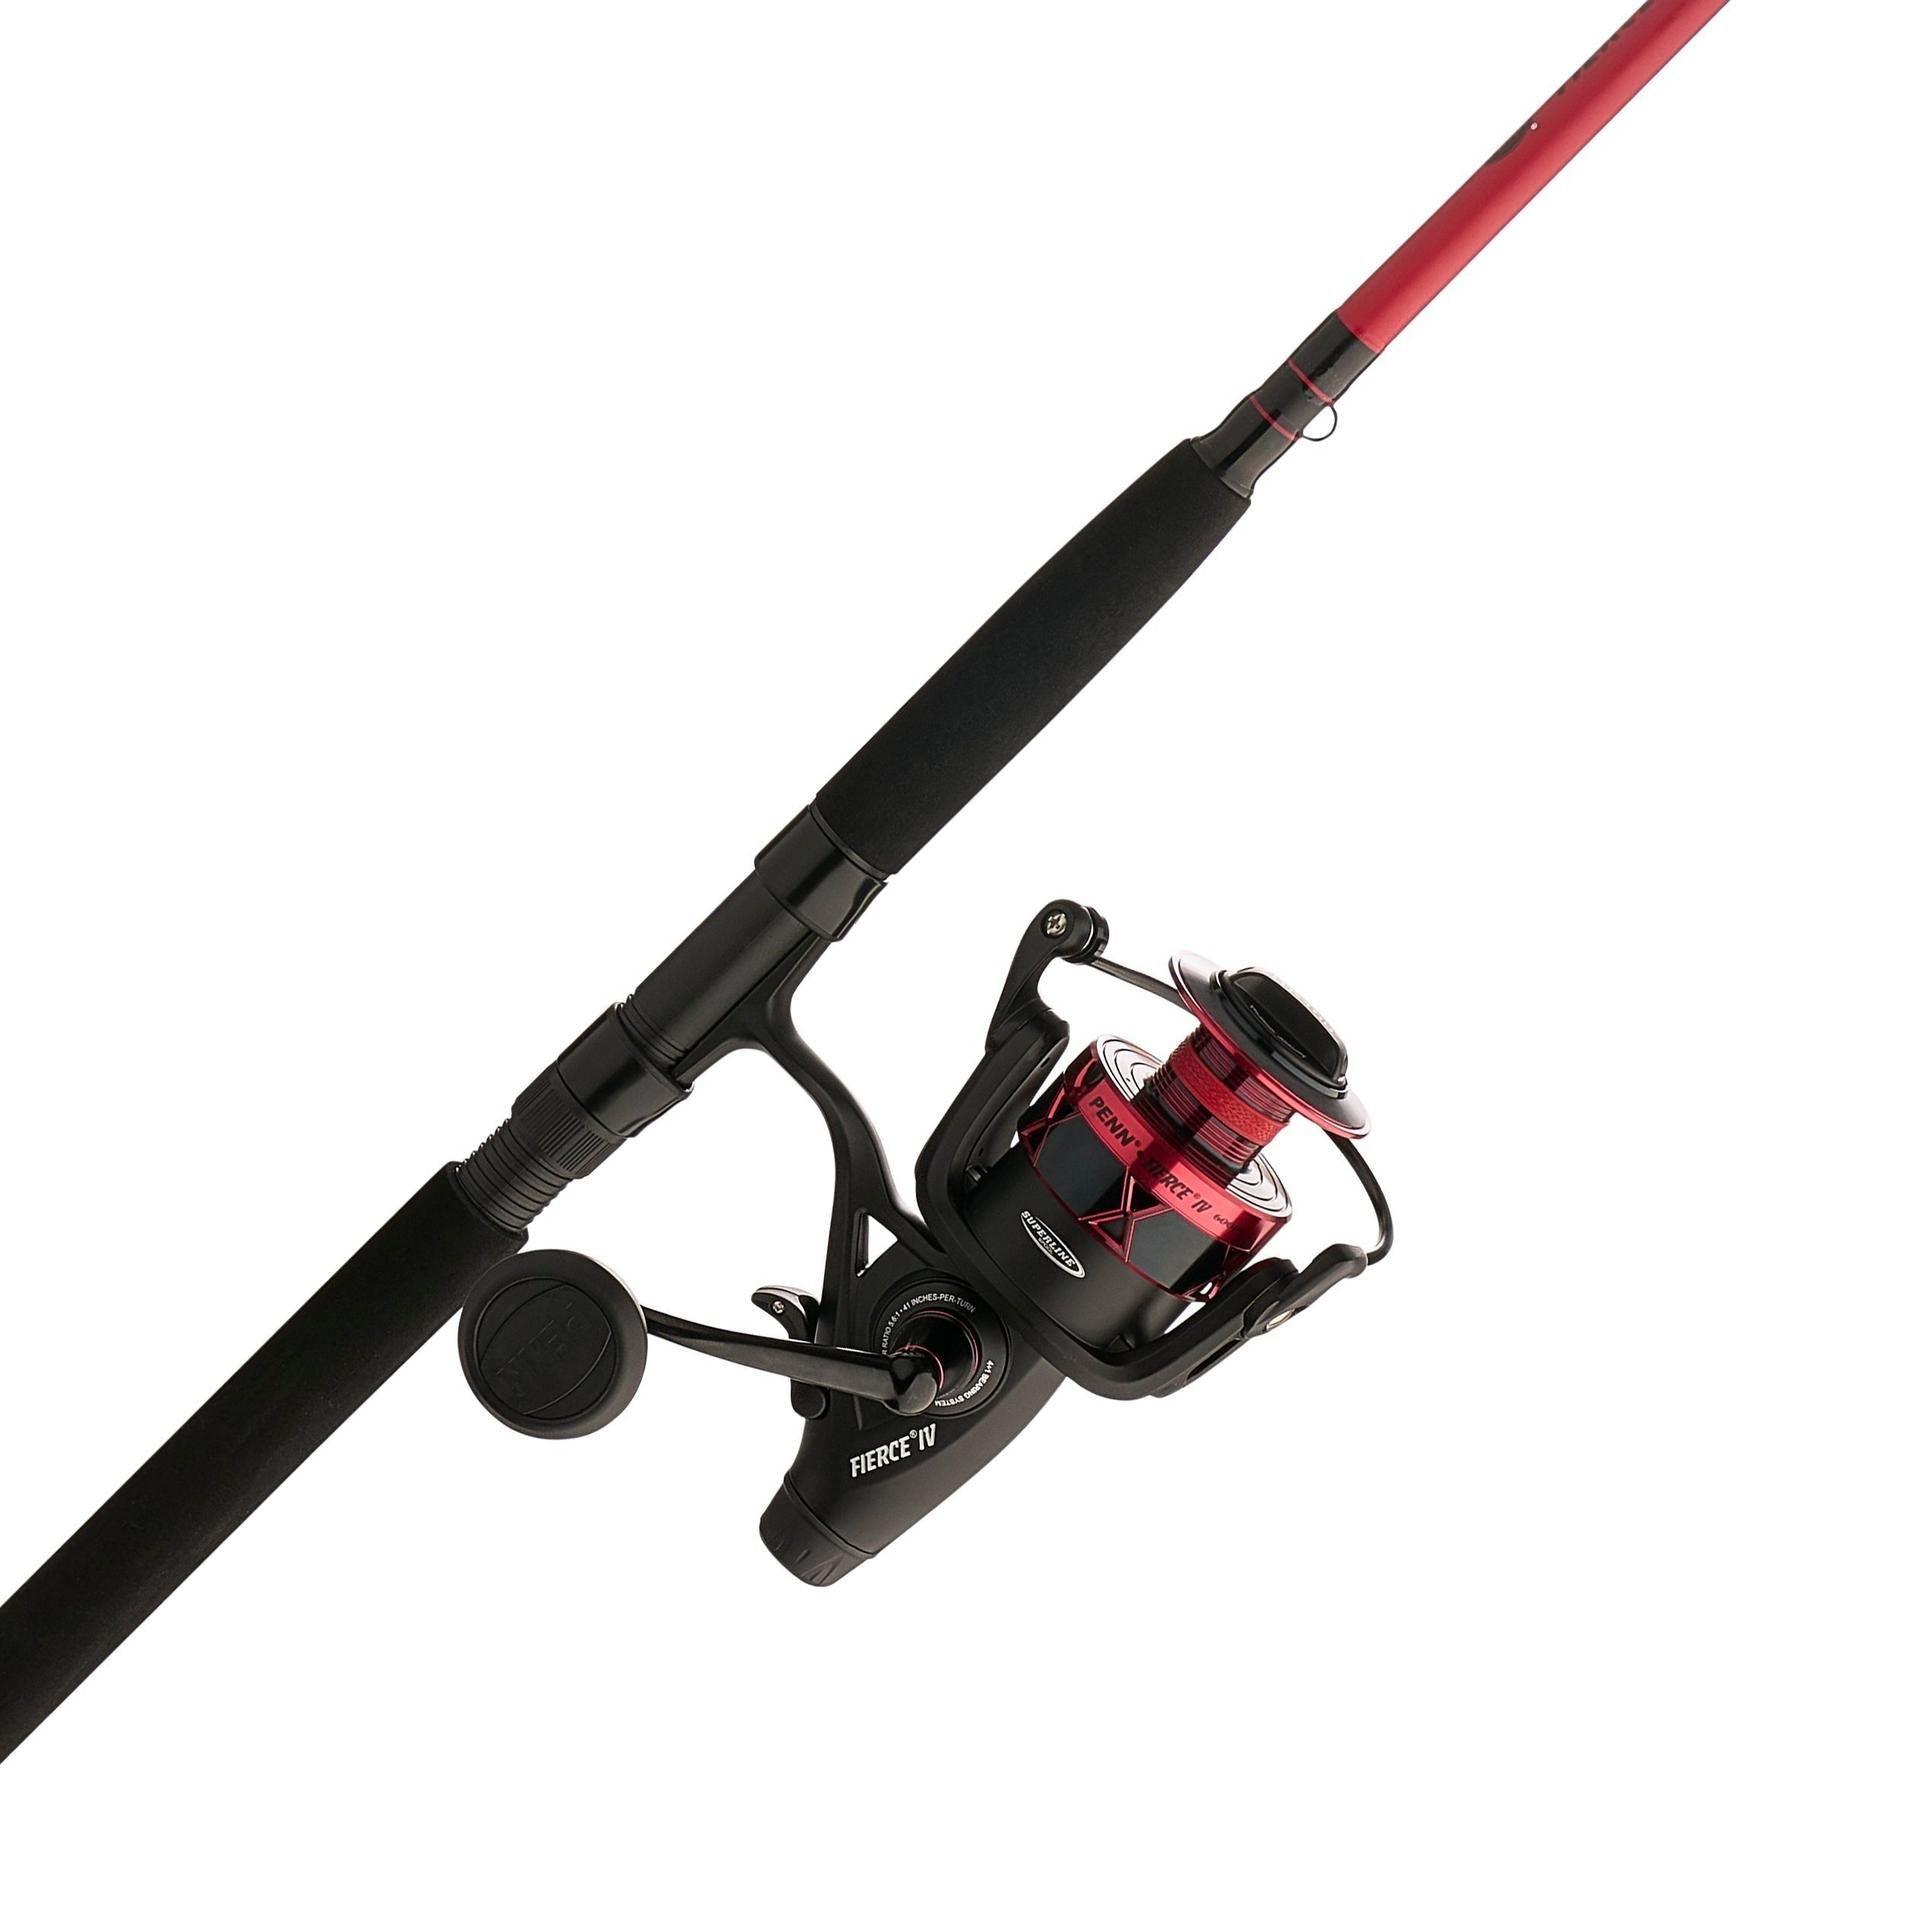 PENN 6'6 Wrath II Fishing Rod and Spinning Reel Combo, Size 2500, Medium  Light Power, Extra Fast Action, Corrosion-Resistant Graphite Construction,  Lightweight and Durable : : Sports & Outdoors